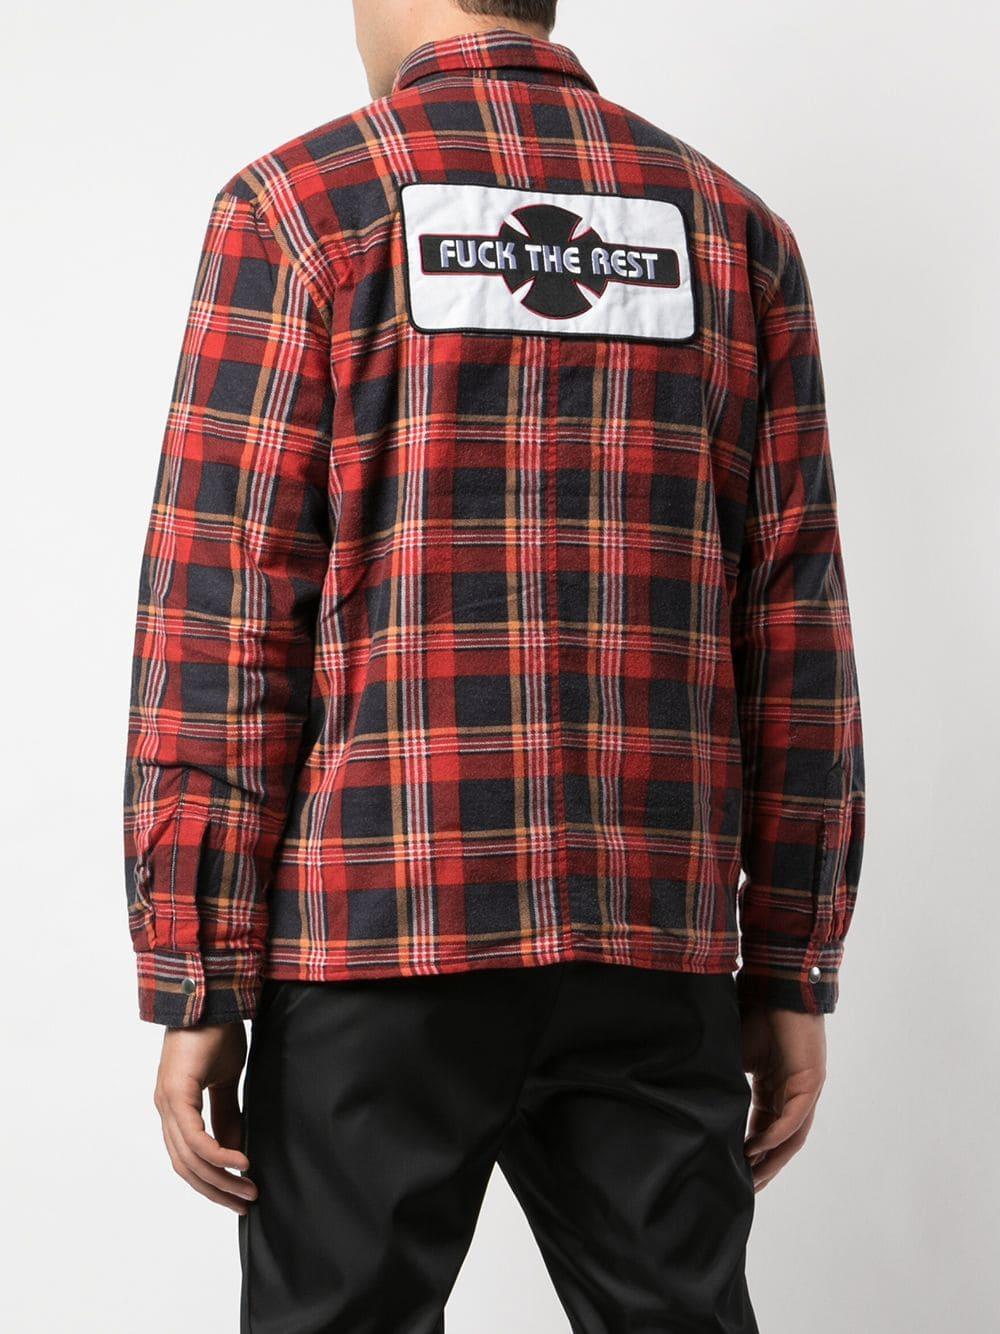 Supreme X Independent Quilted Flannel Shirt in Red for Men - Lyst